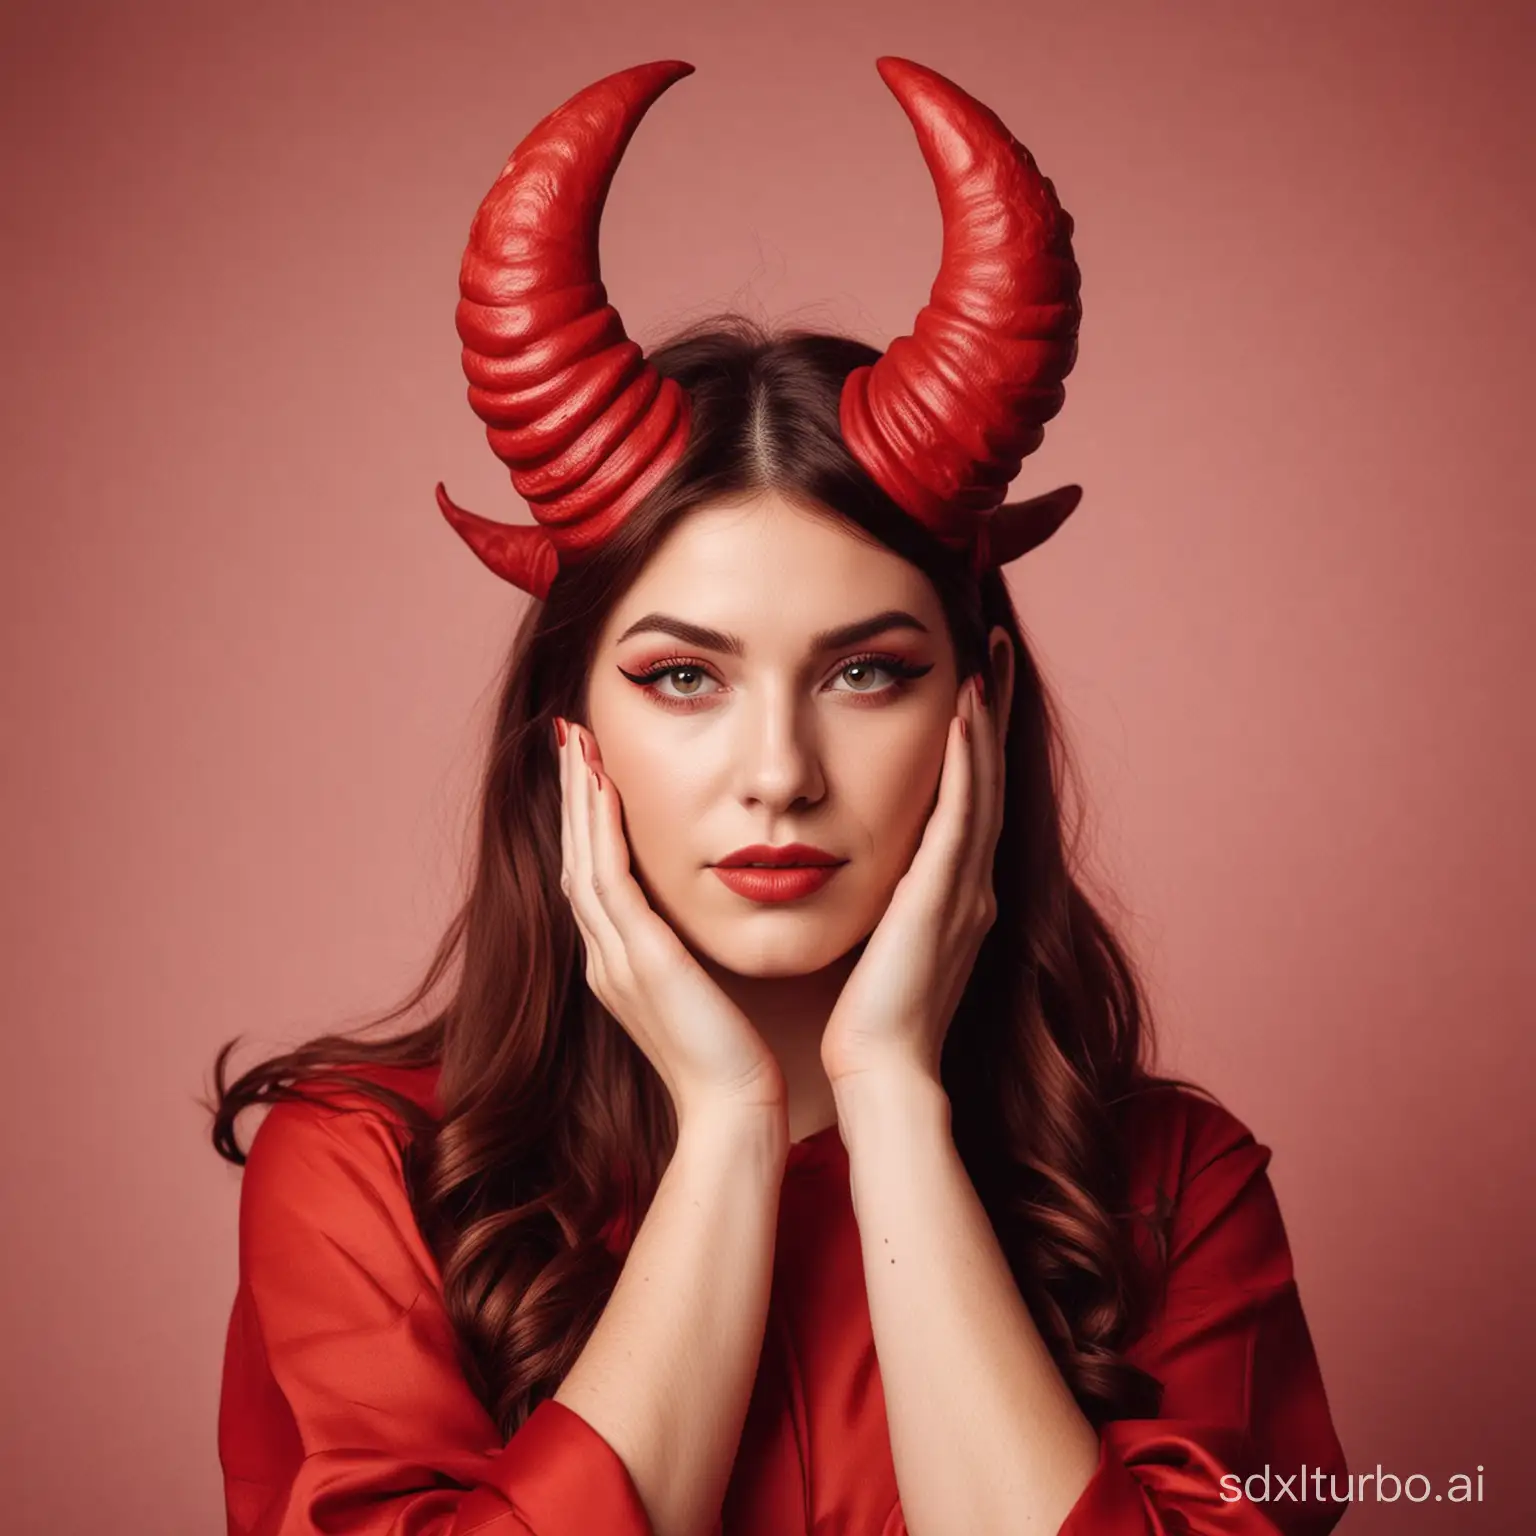 Taurus-Woman-with-Horns-Symbolic-Portrait-in-Vibrant-Red